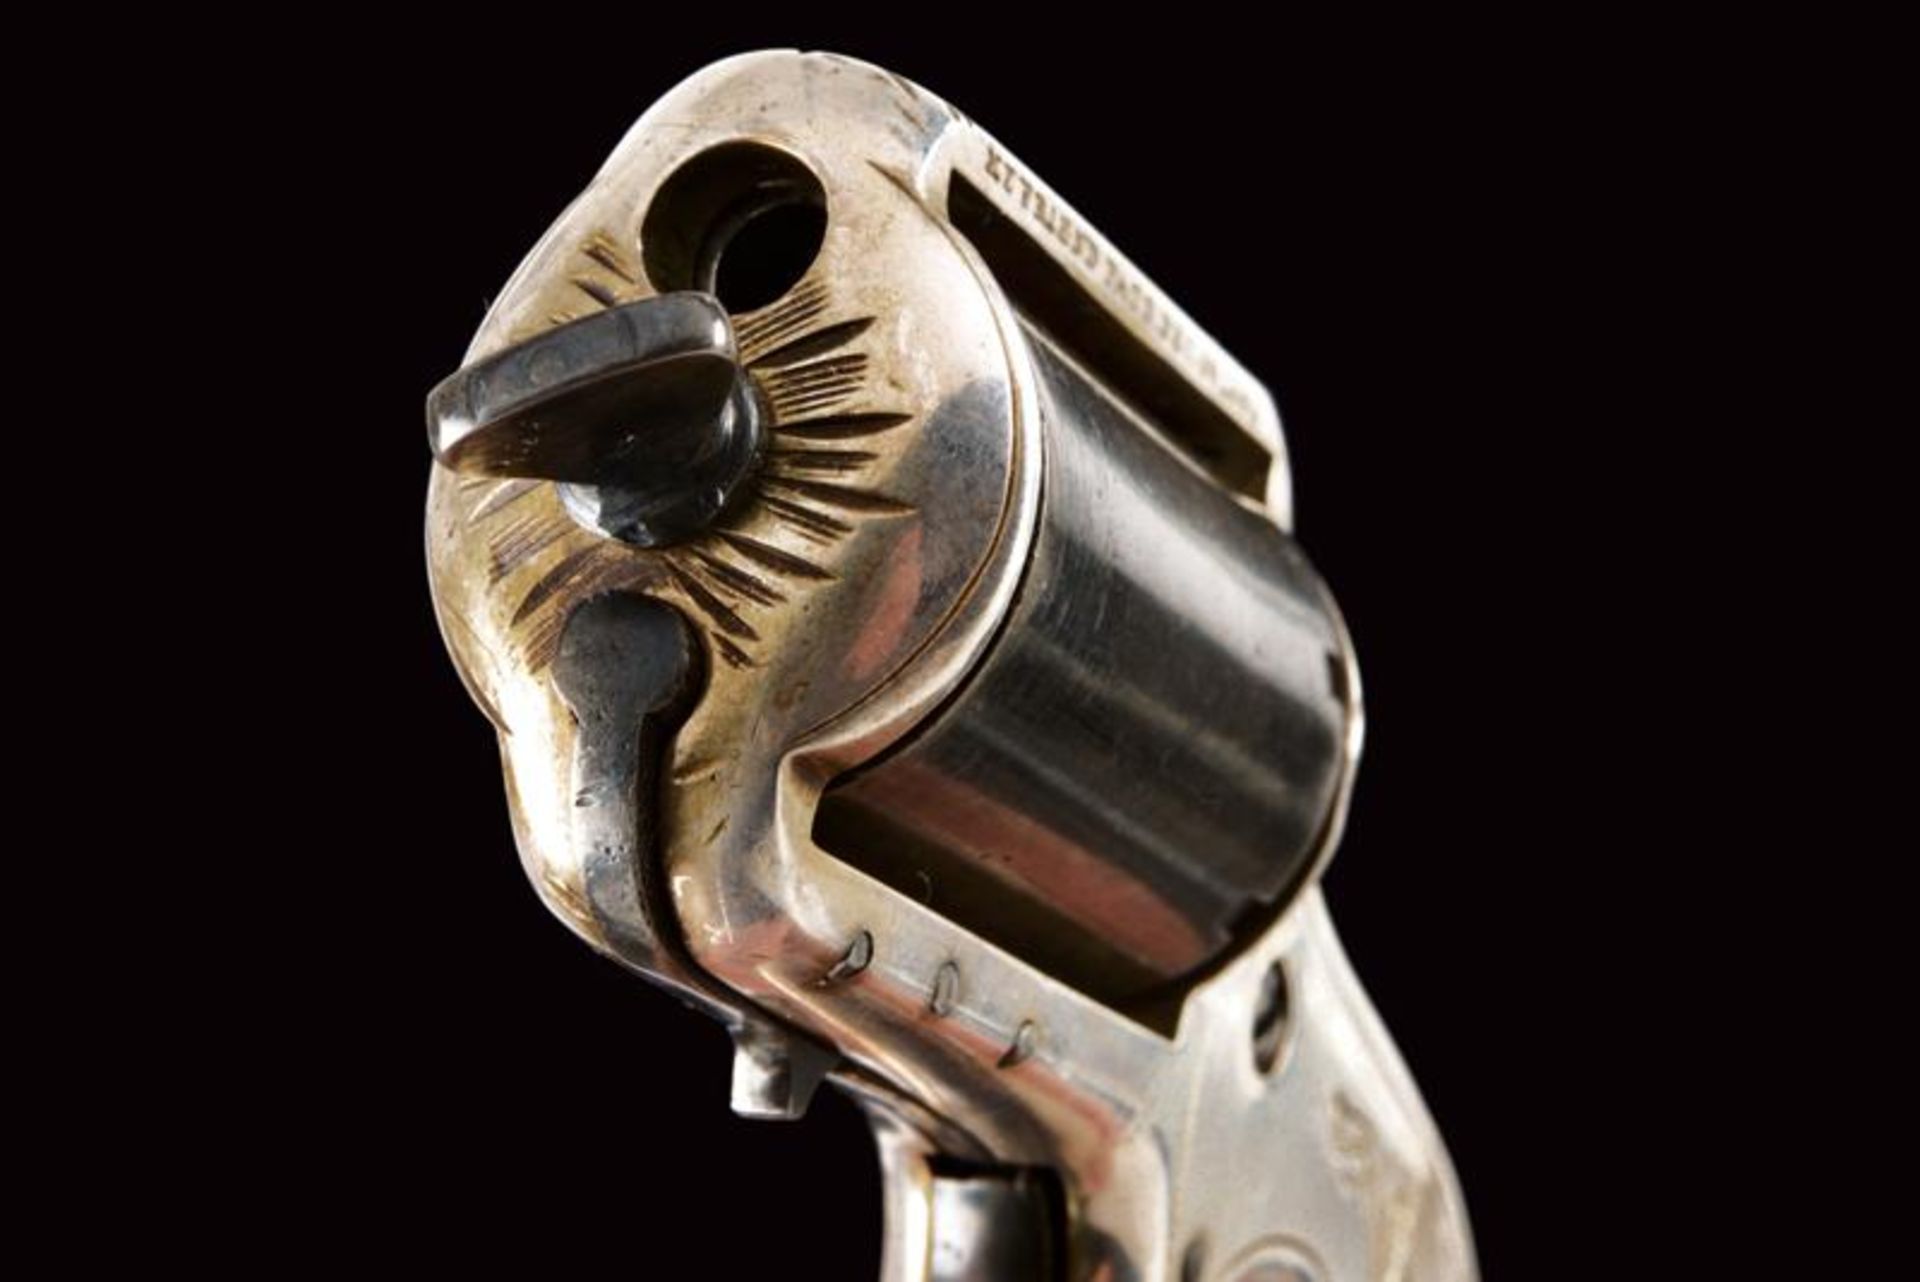 A James Reid 32 cal. Knuckle-Duster revolver 'My Friend' - Image 3 of 6